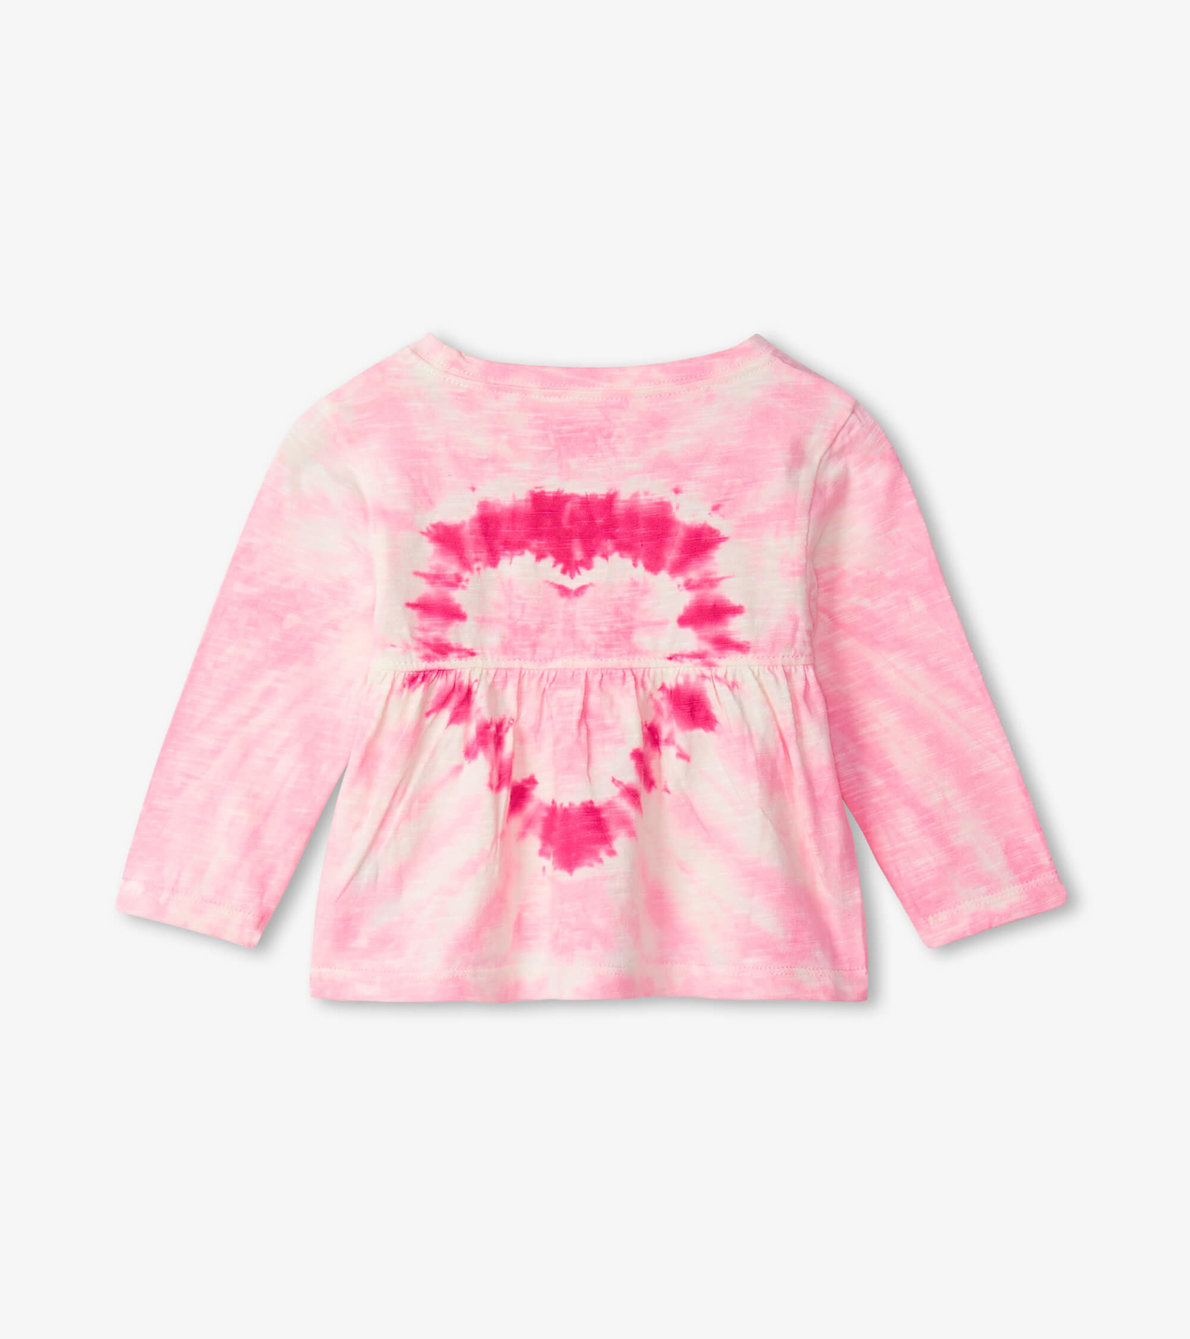 View larger image of Tie Dye Heart Long Sleeve Baby Tee